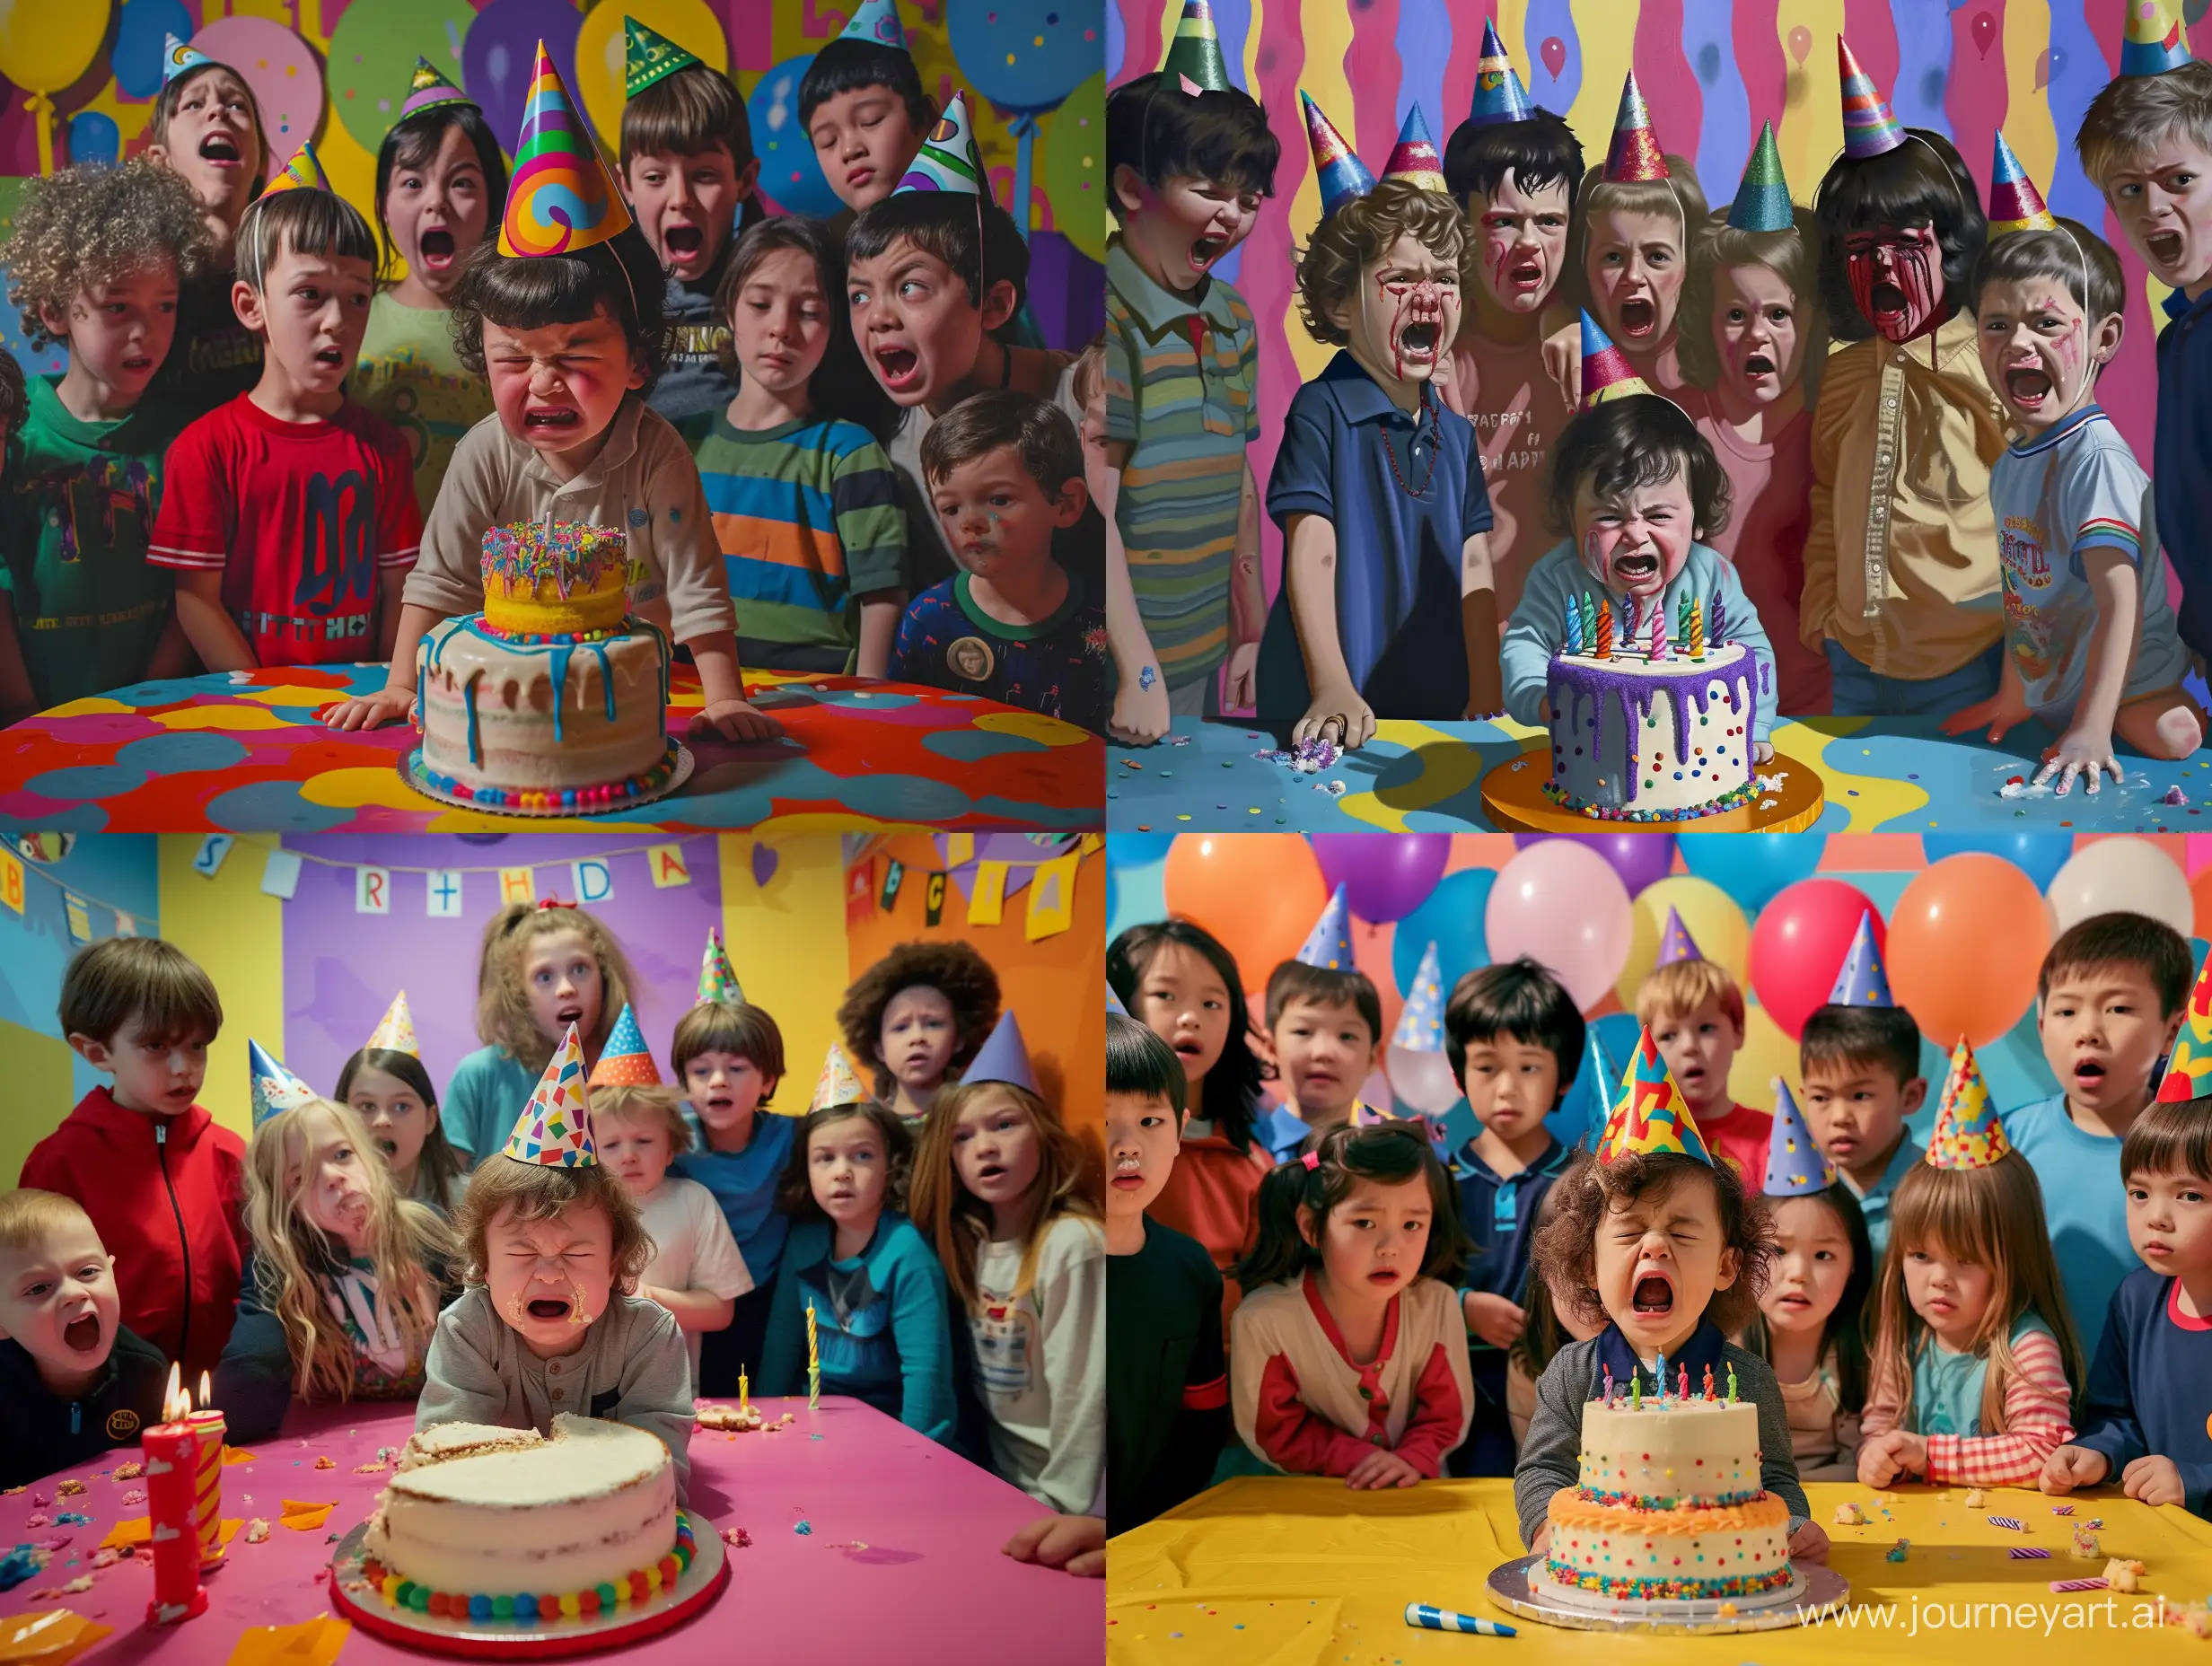 Lonely-Child-Crying-at-Birthday-Party-with-Unsettling-Smiles